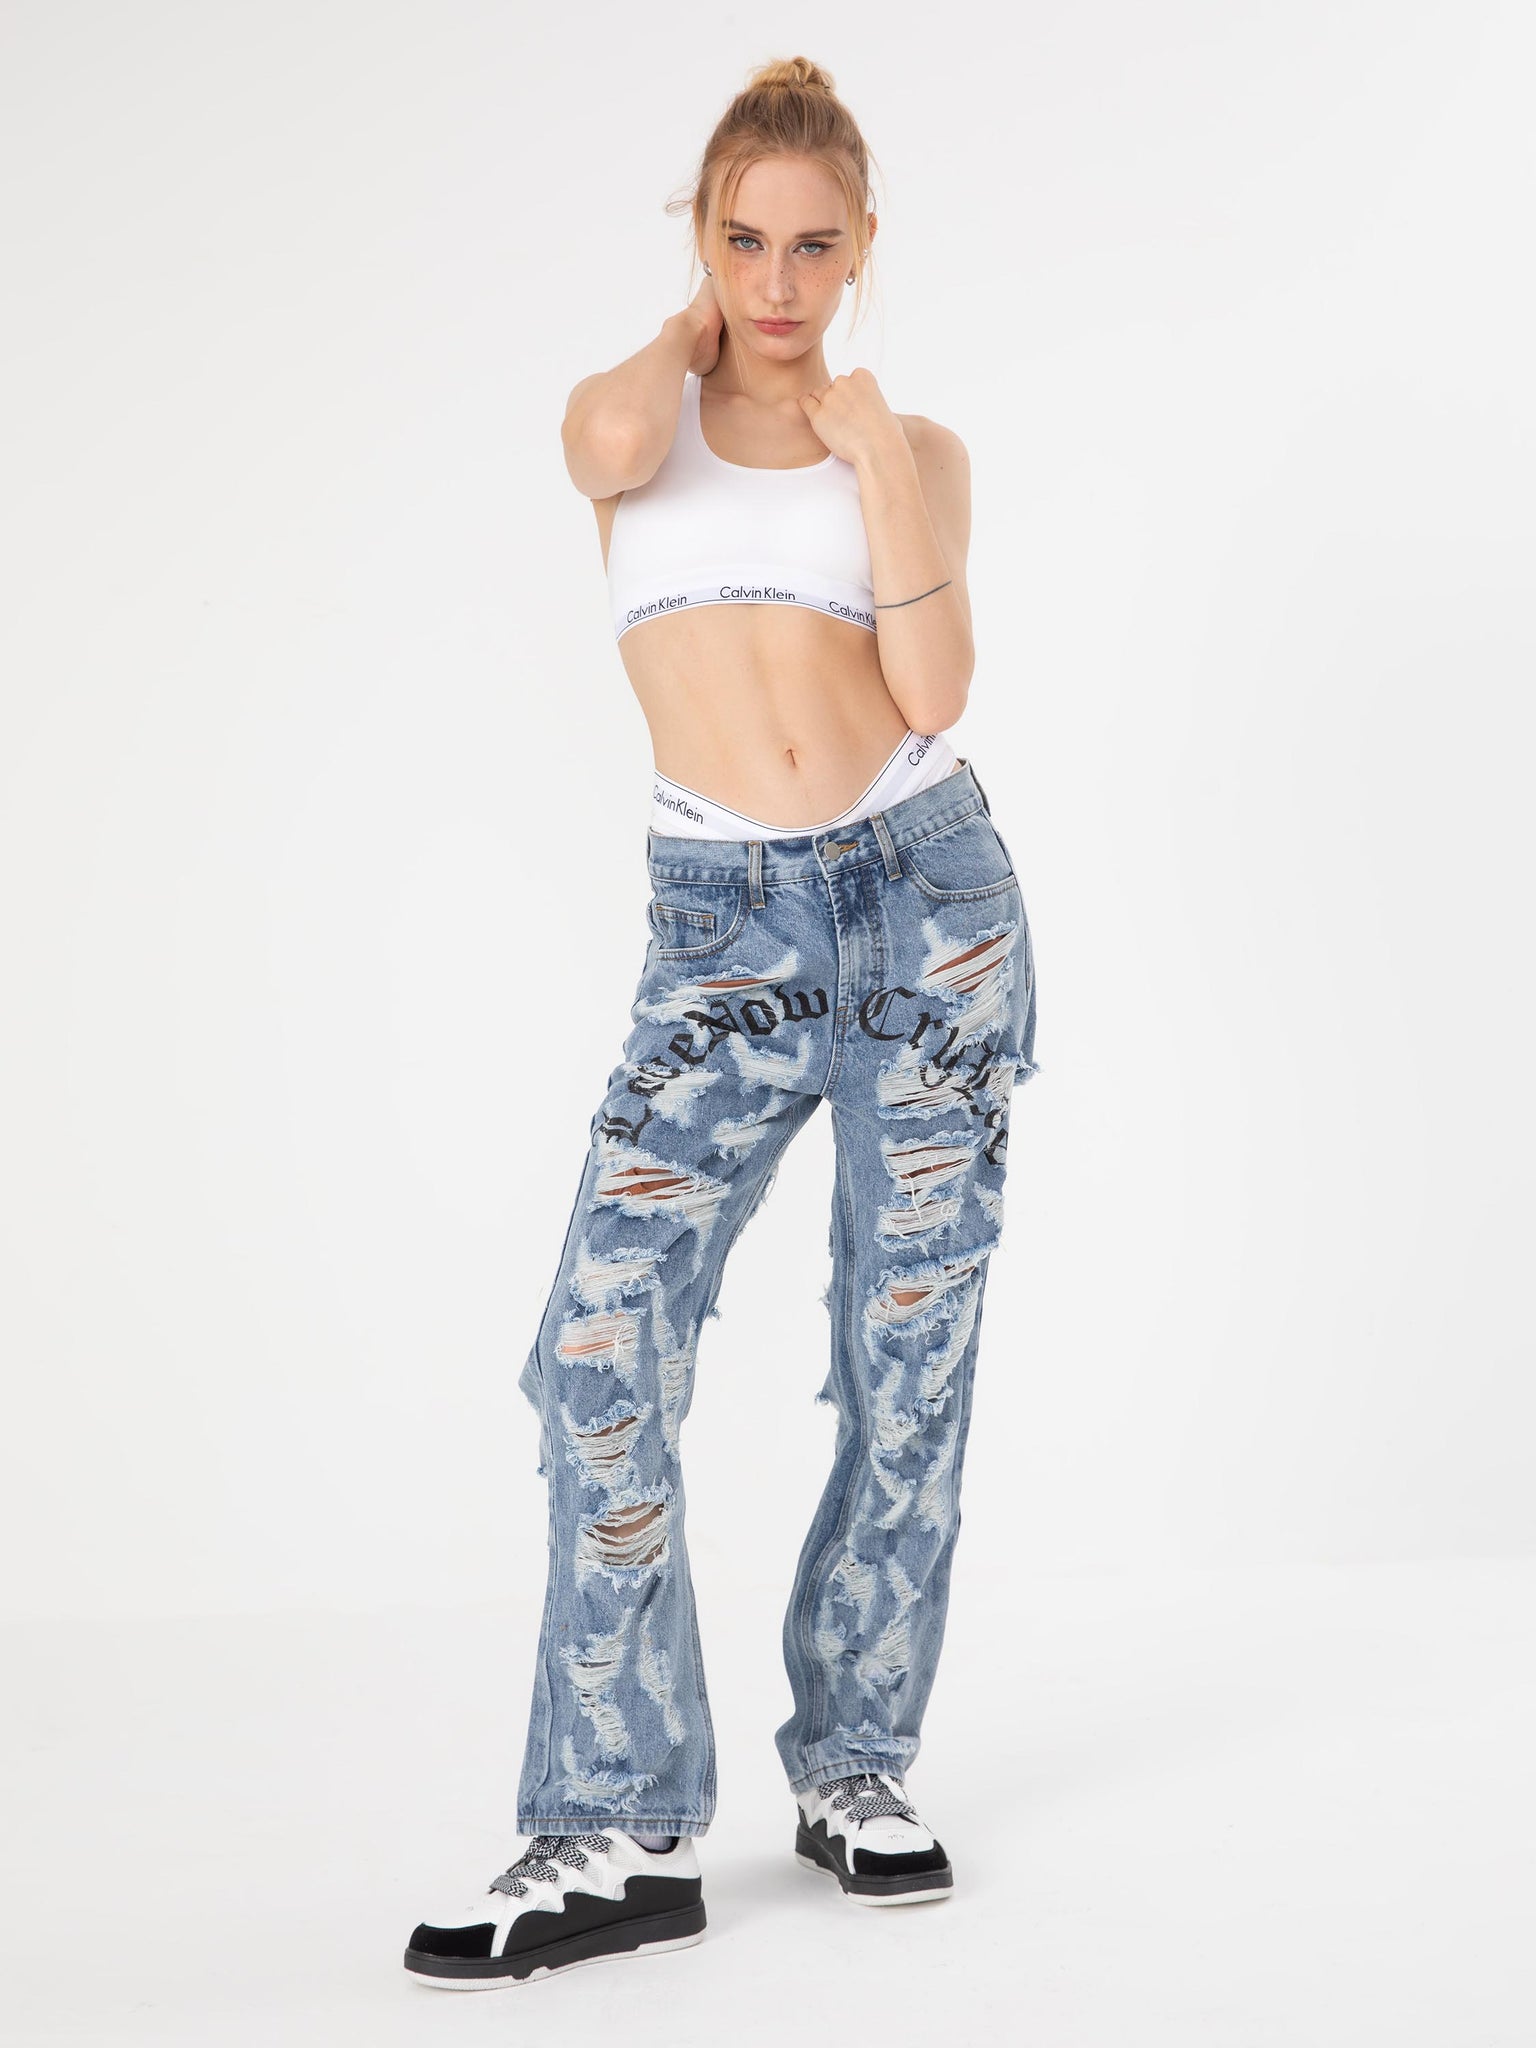 Thesupermade Punk Design Ripped Acid wash Jeans -1553